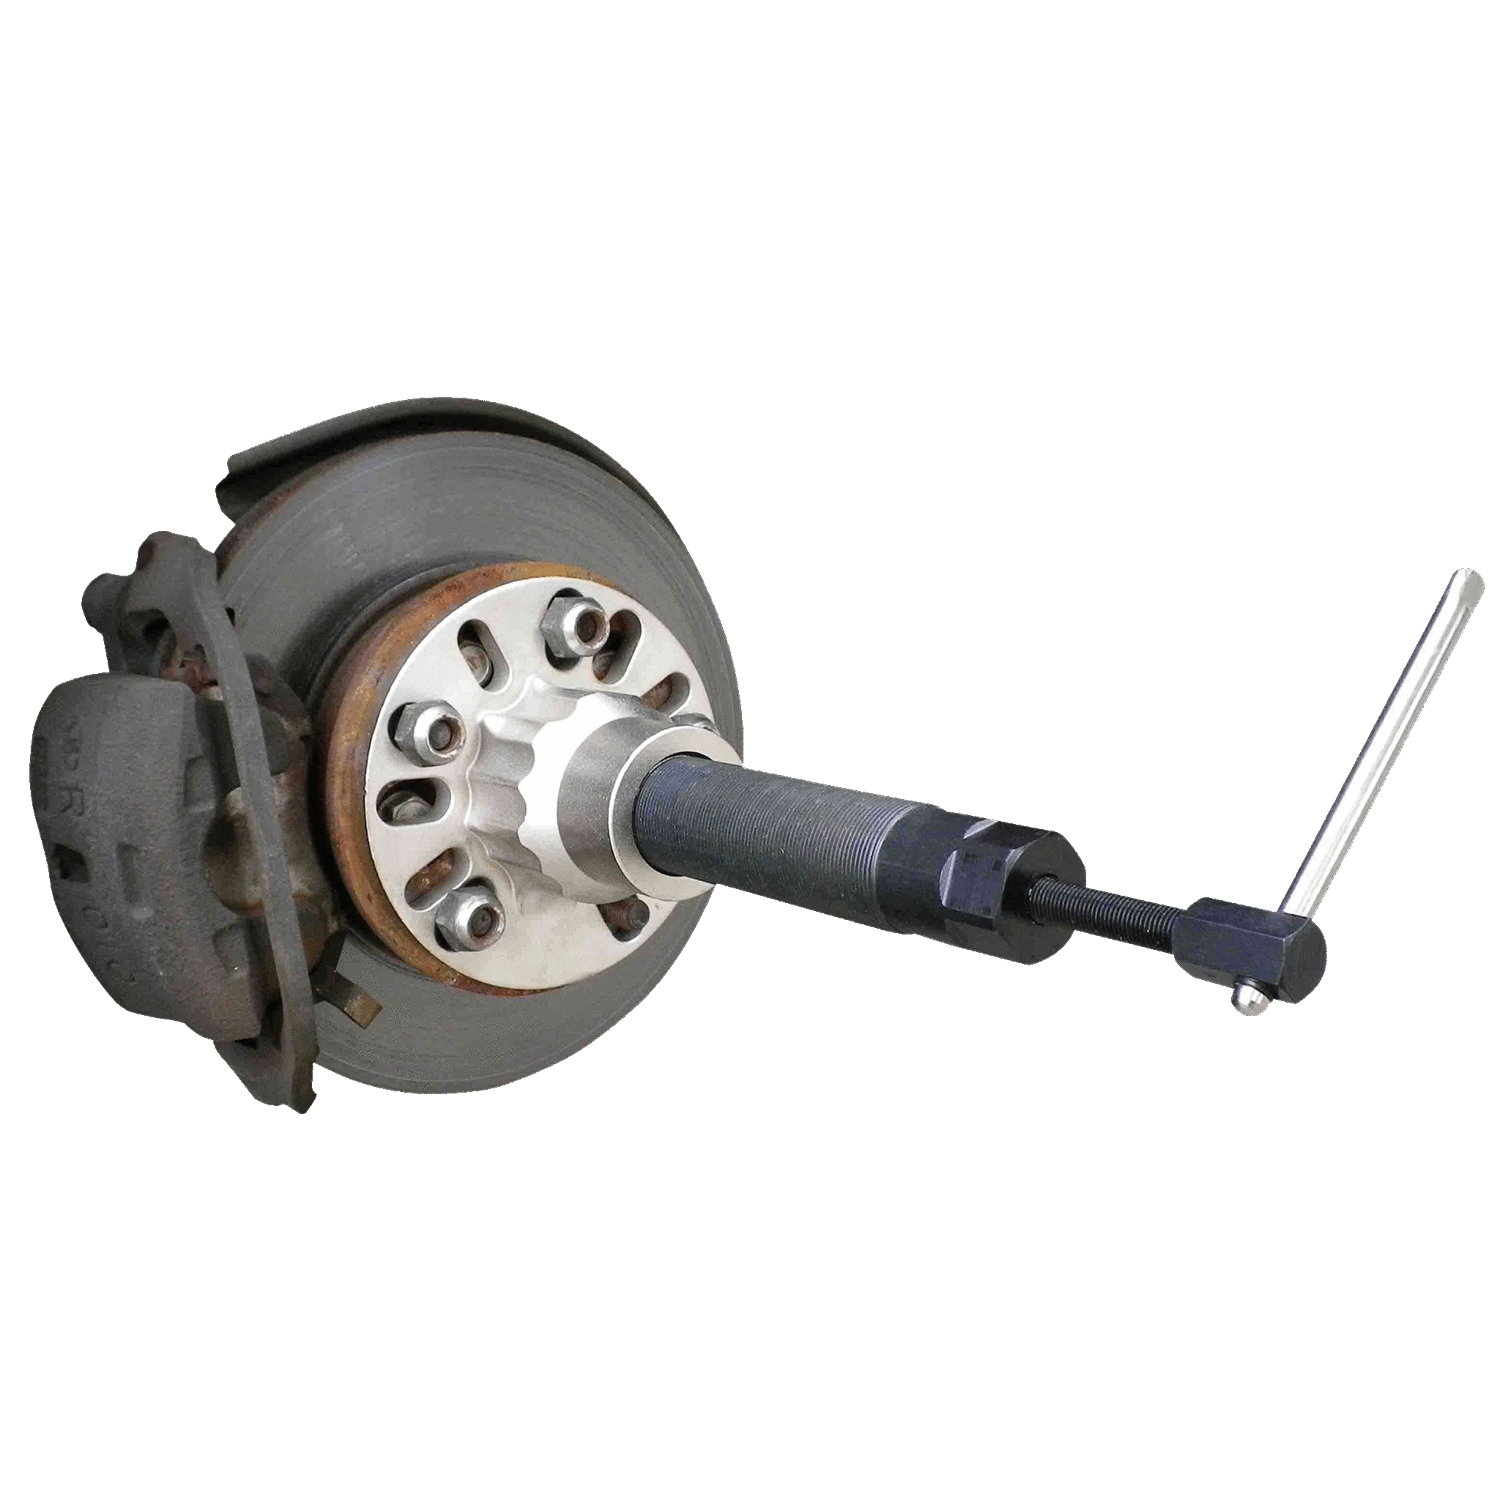 BAHCO BWHEPS Wheel Hub Hydraulic Puller (BAHCO Tools) - Premium Wheel Hub Hydraulic Puller from BAHCO - Shop now at Yew Aik.